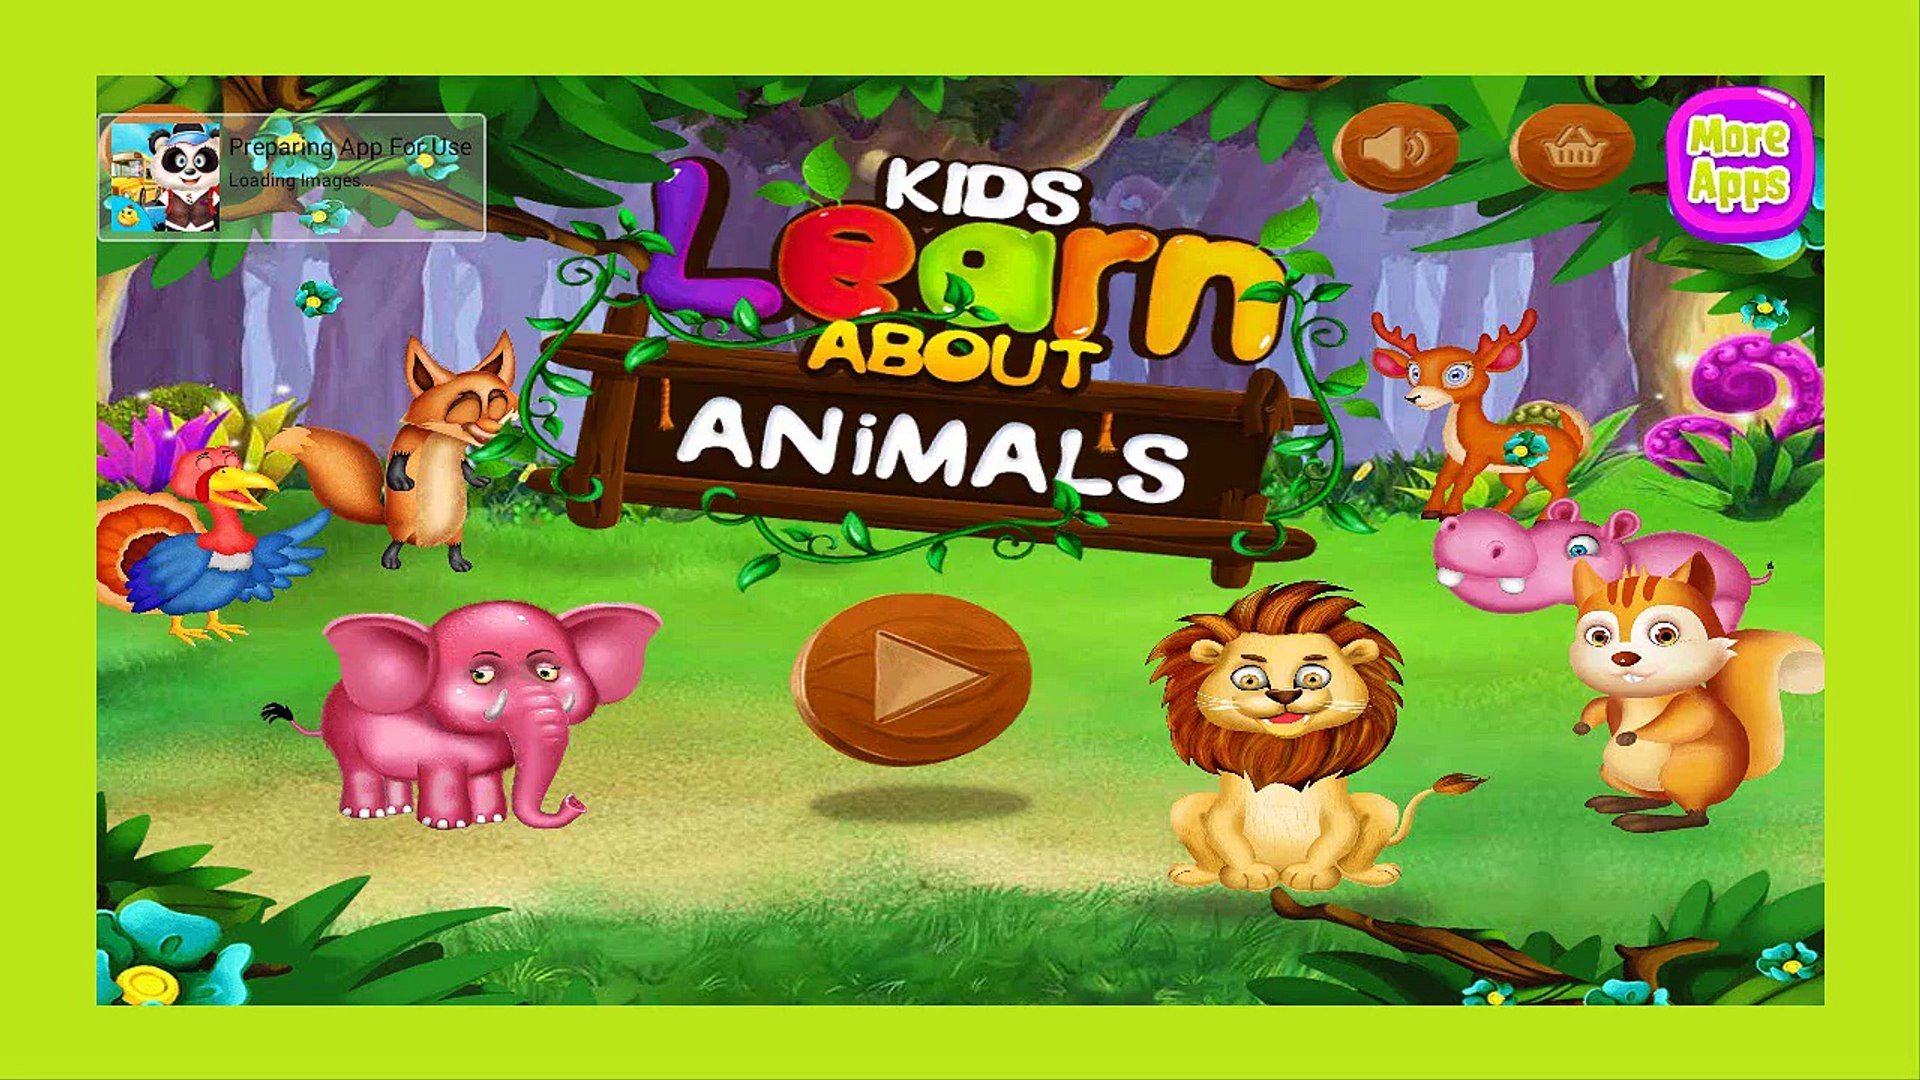 Kids learn about animals - Education app game video for Kids